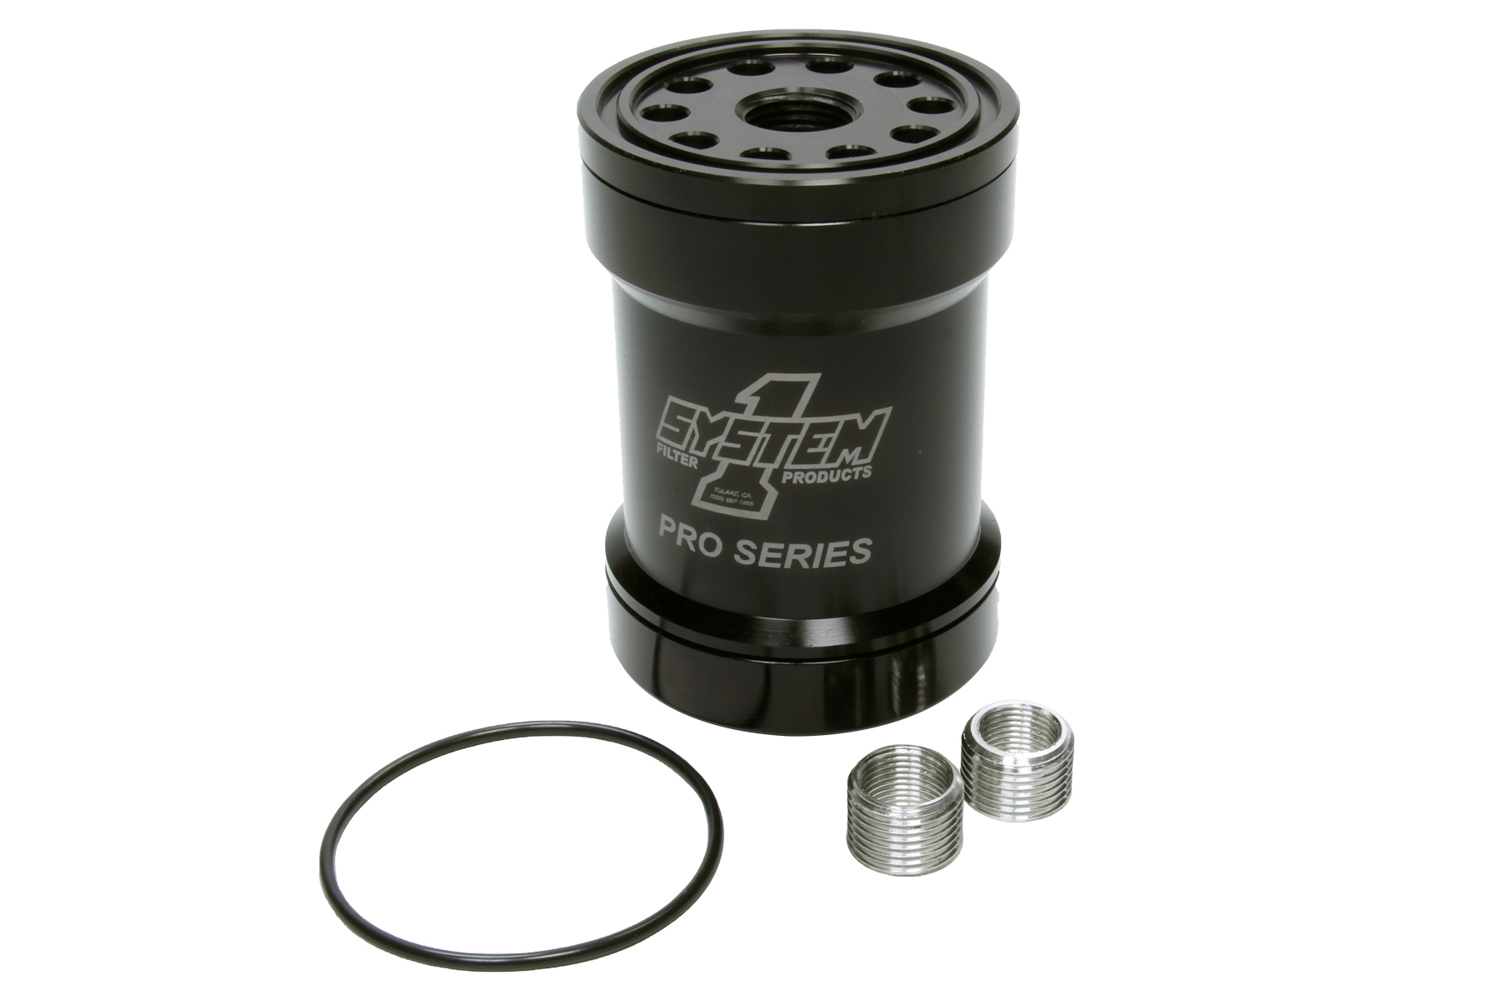 System One 209-571BPS Oil Filter, Canister, Screw-On, 5.750 in Tall, 1-12 in Thread, 75 Micron Replaceable Element, Aluminum, Black Anodized, Universal, Each